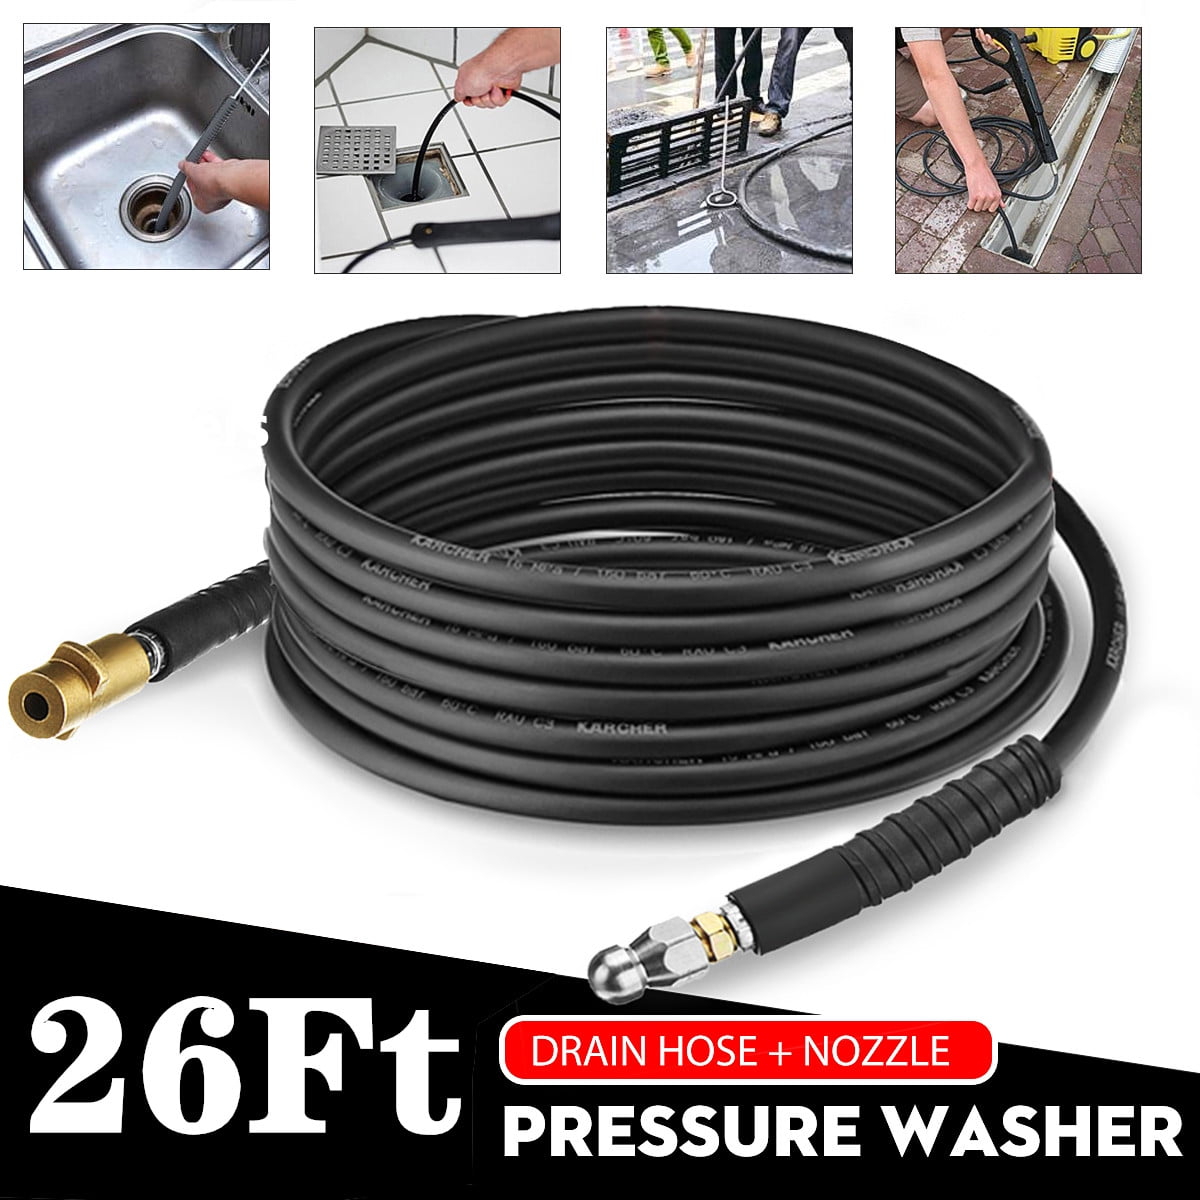 10M Pressure Washer Sewer Drain Cleaning Hose w/ Jet Nozzle For Karcher K Series 